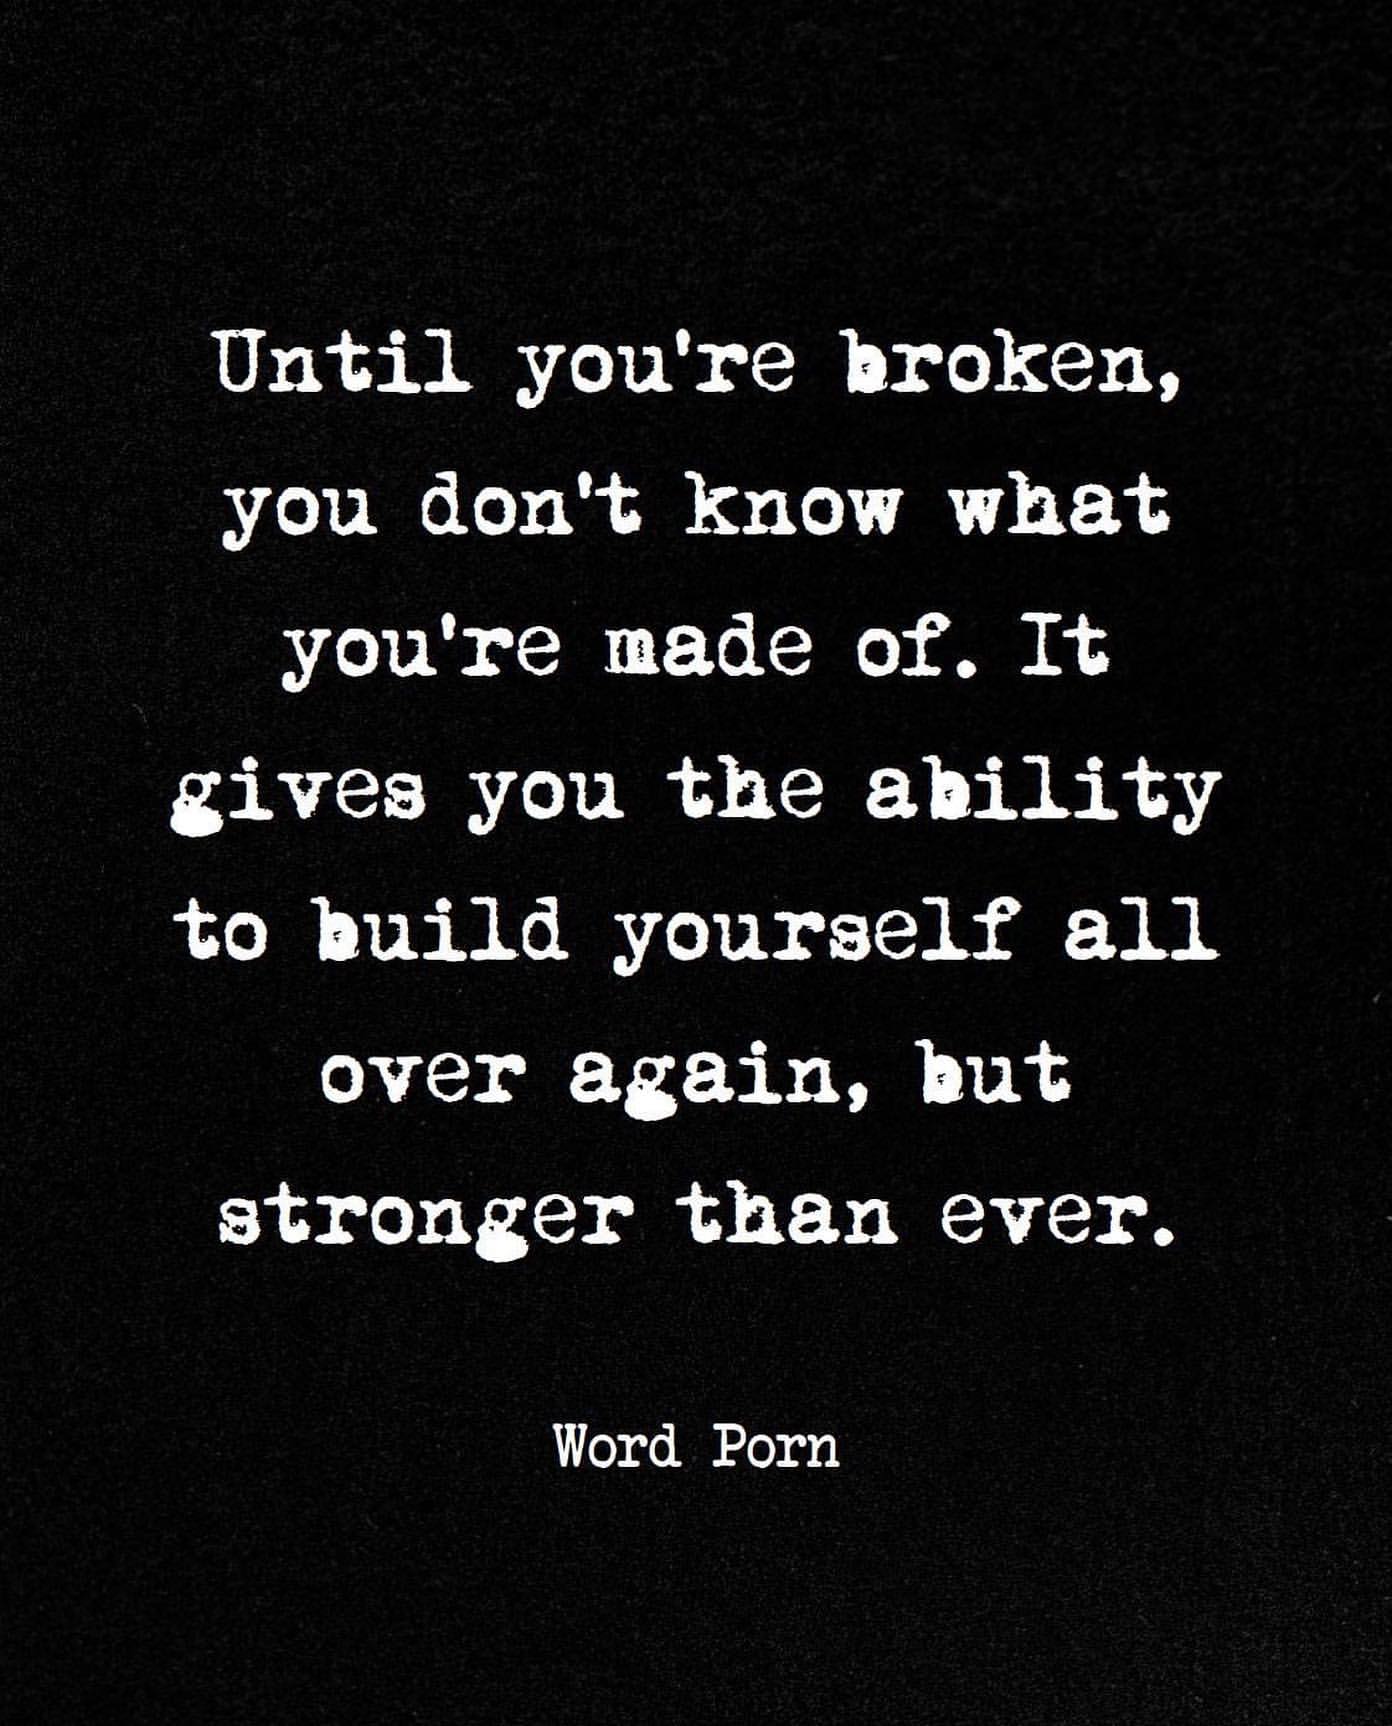 Until you're broken, you don't know what you're made of. It gives you the ability to build yourself all over again, but stronger than ever.